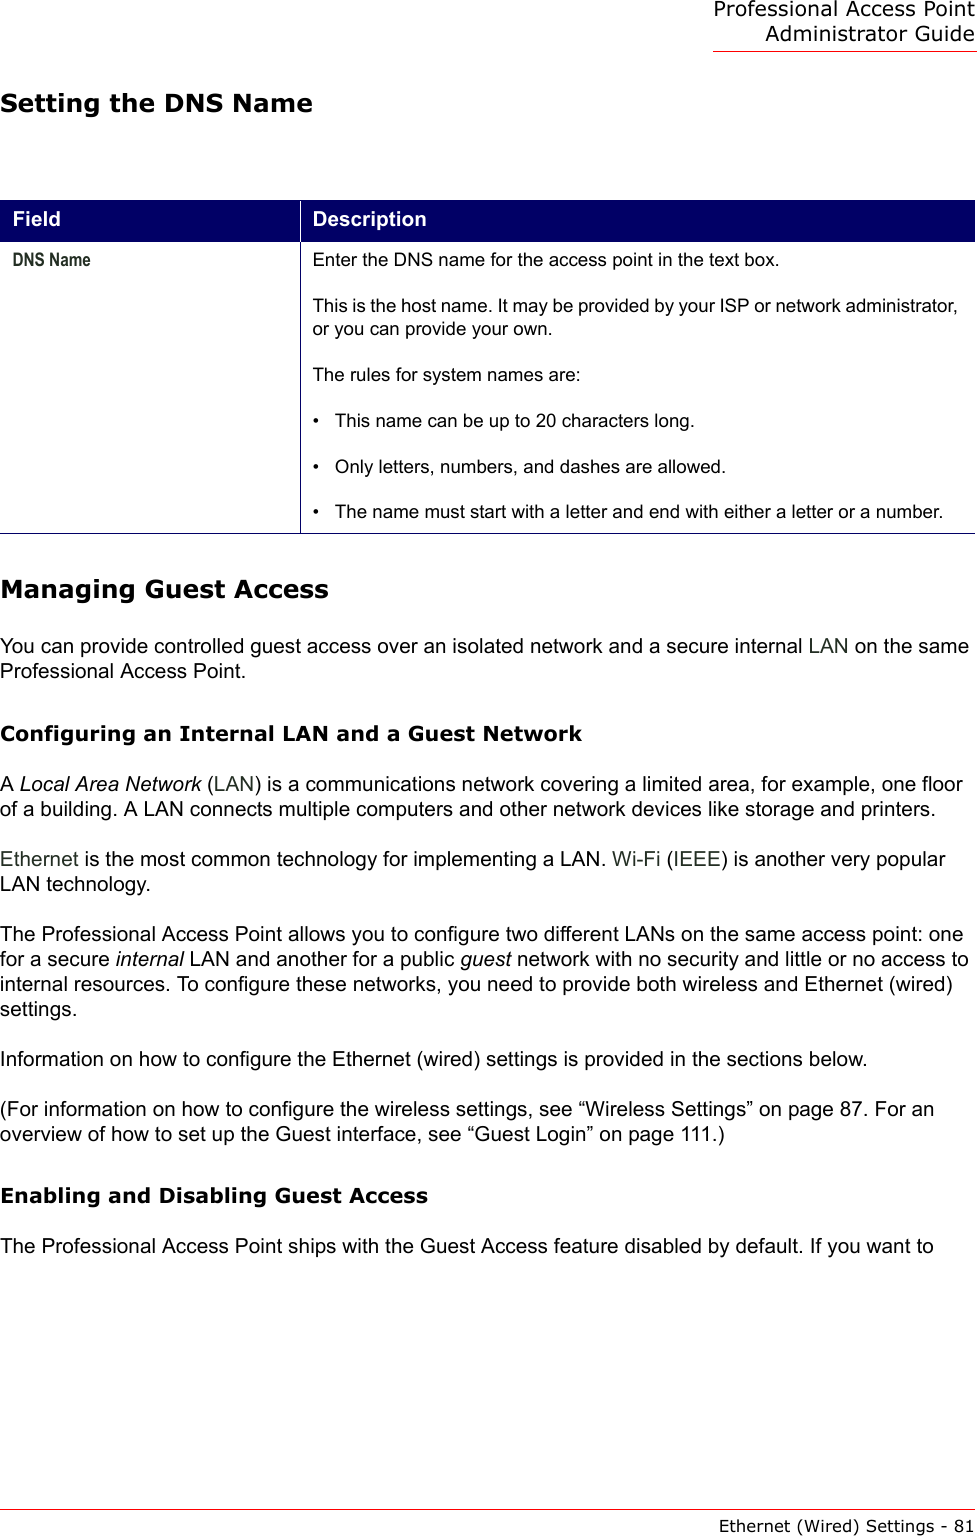 Professional Access Point Administrator GuideEthernet (Wired) Settings - 81Setting the DNS NameManaging Guest AccessYou can provide controlled guest access over an isolated network and a secure internal LAN on the same Professional Access Point.Configuring an Internal LAN and a Guest NetworkA Local Area Network (LAN) is a communications network covering a limited area, for example, one floor of a building. A LAN connects multiple computers and other network devices like storage and printers. Ethernet is the most common technology for implementing a LAN. Wi-Fi (IEEE) is another very popular LAN technology.The Professional Access Point allows you to configure two different LANs on the same access point: one for a secure internal LAN and another for a public guest network with no security and little or no access to internal resources. To configure these networks, you need to provide both wireless and Ethernet (wired) settings.Information on how to configure the Ethernet (wired) settings is provided in the sections below.(For information on how to configure the wireless settings, see “Wireless Settings” on page 87. For an overview of how to set up the Guest interface, see “Guest Login” on page 111.)Enabling and Disabling Guest AccessThe Professional Access Point ships with the Guest Access feature disabled by default. If you want to Field DescriptionDNS Name Enter the DNS name for the access point in the text box.This is the host name. It may be provided by your ISP or network administrator, or you can provide your own.The rules for system names are:• This name can be up to 20 characters long.• Only letters, numbers, and dashes are allowed.• The name must start with a letter and end with either a letter or a number.